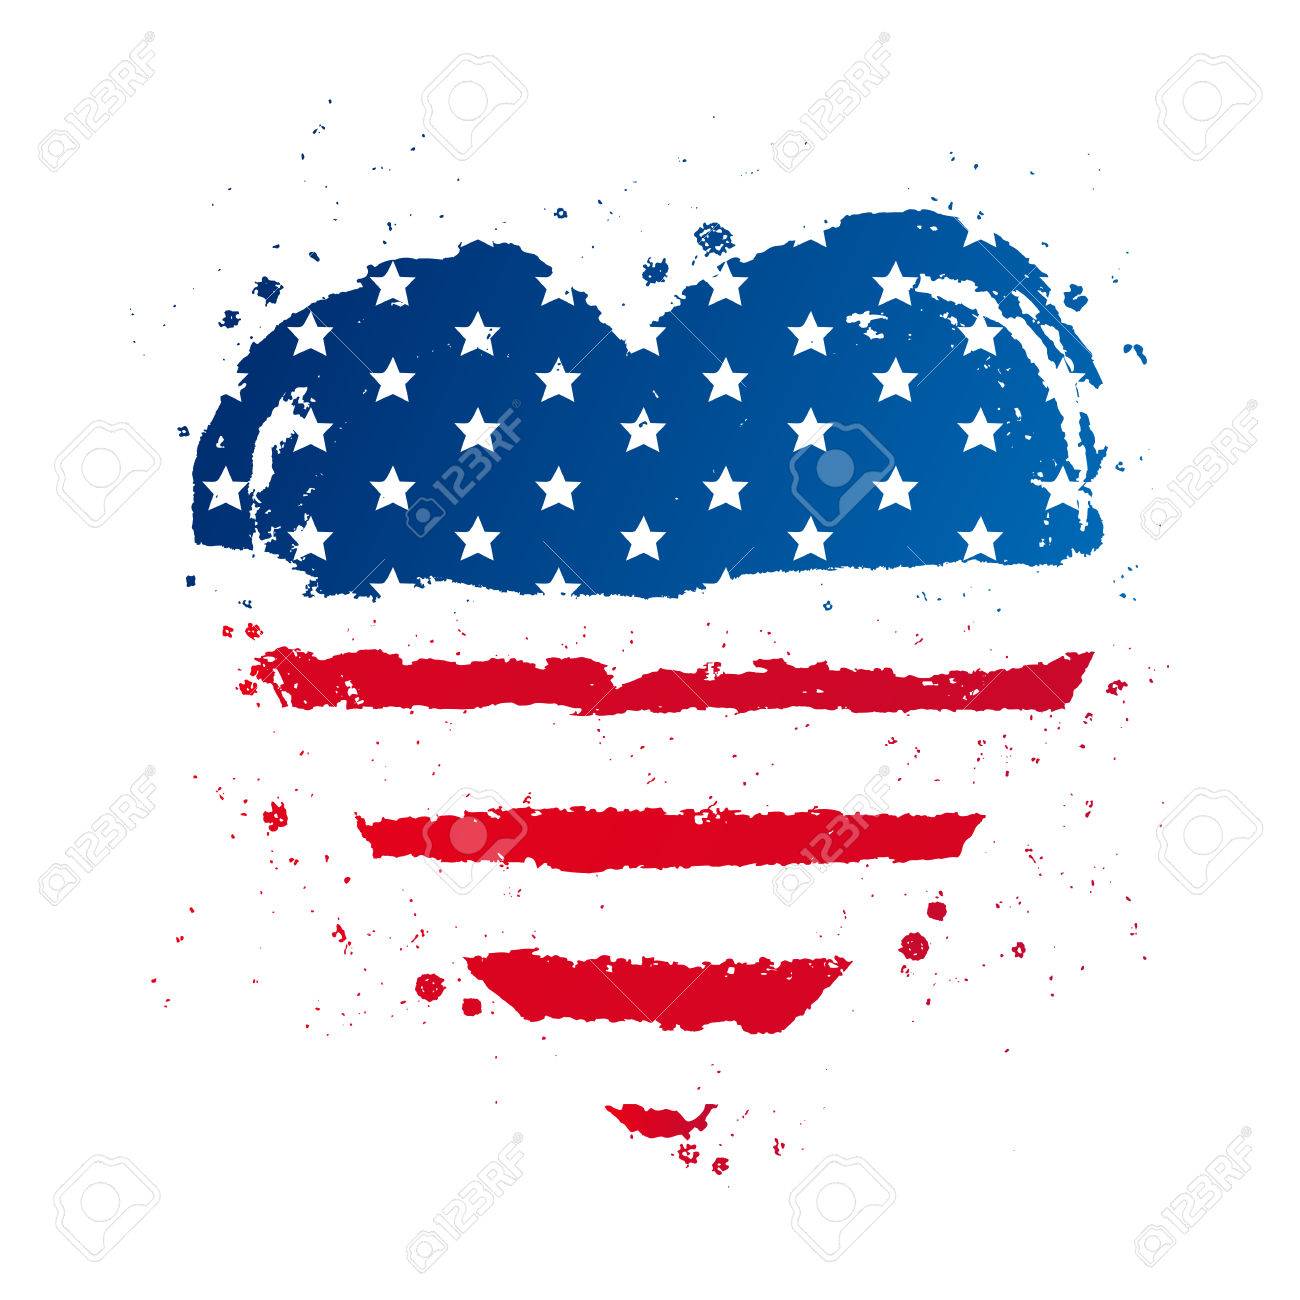 American flag in the shape of a large heart